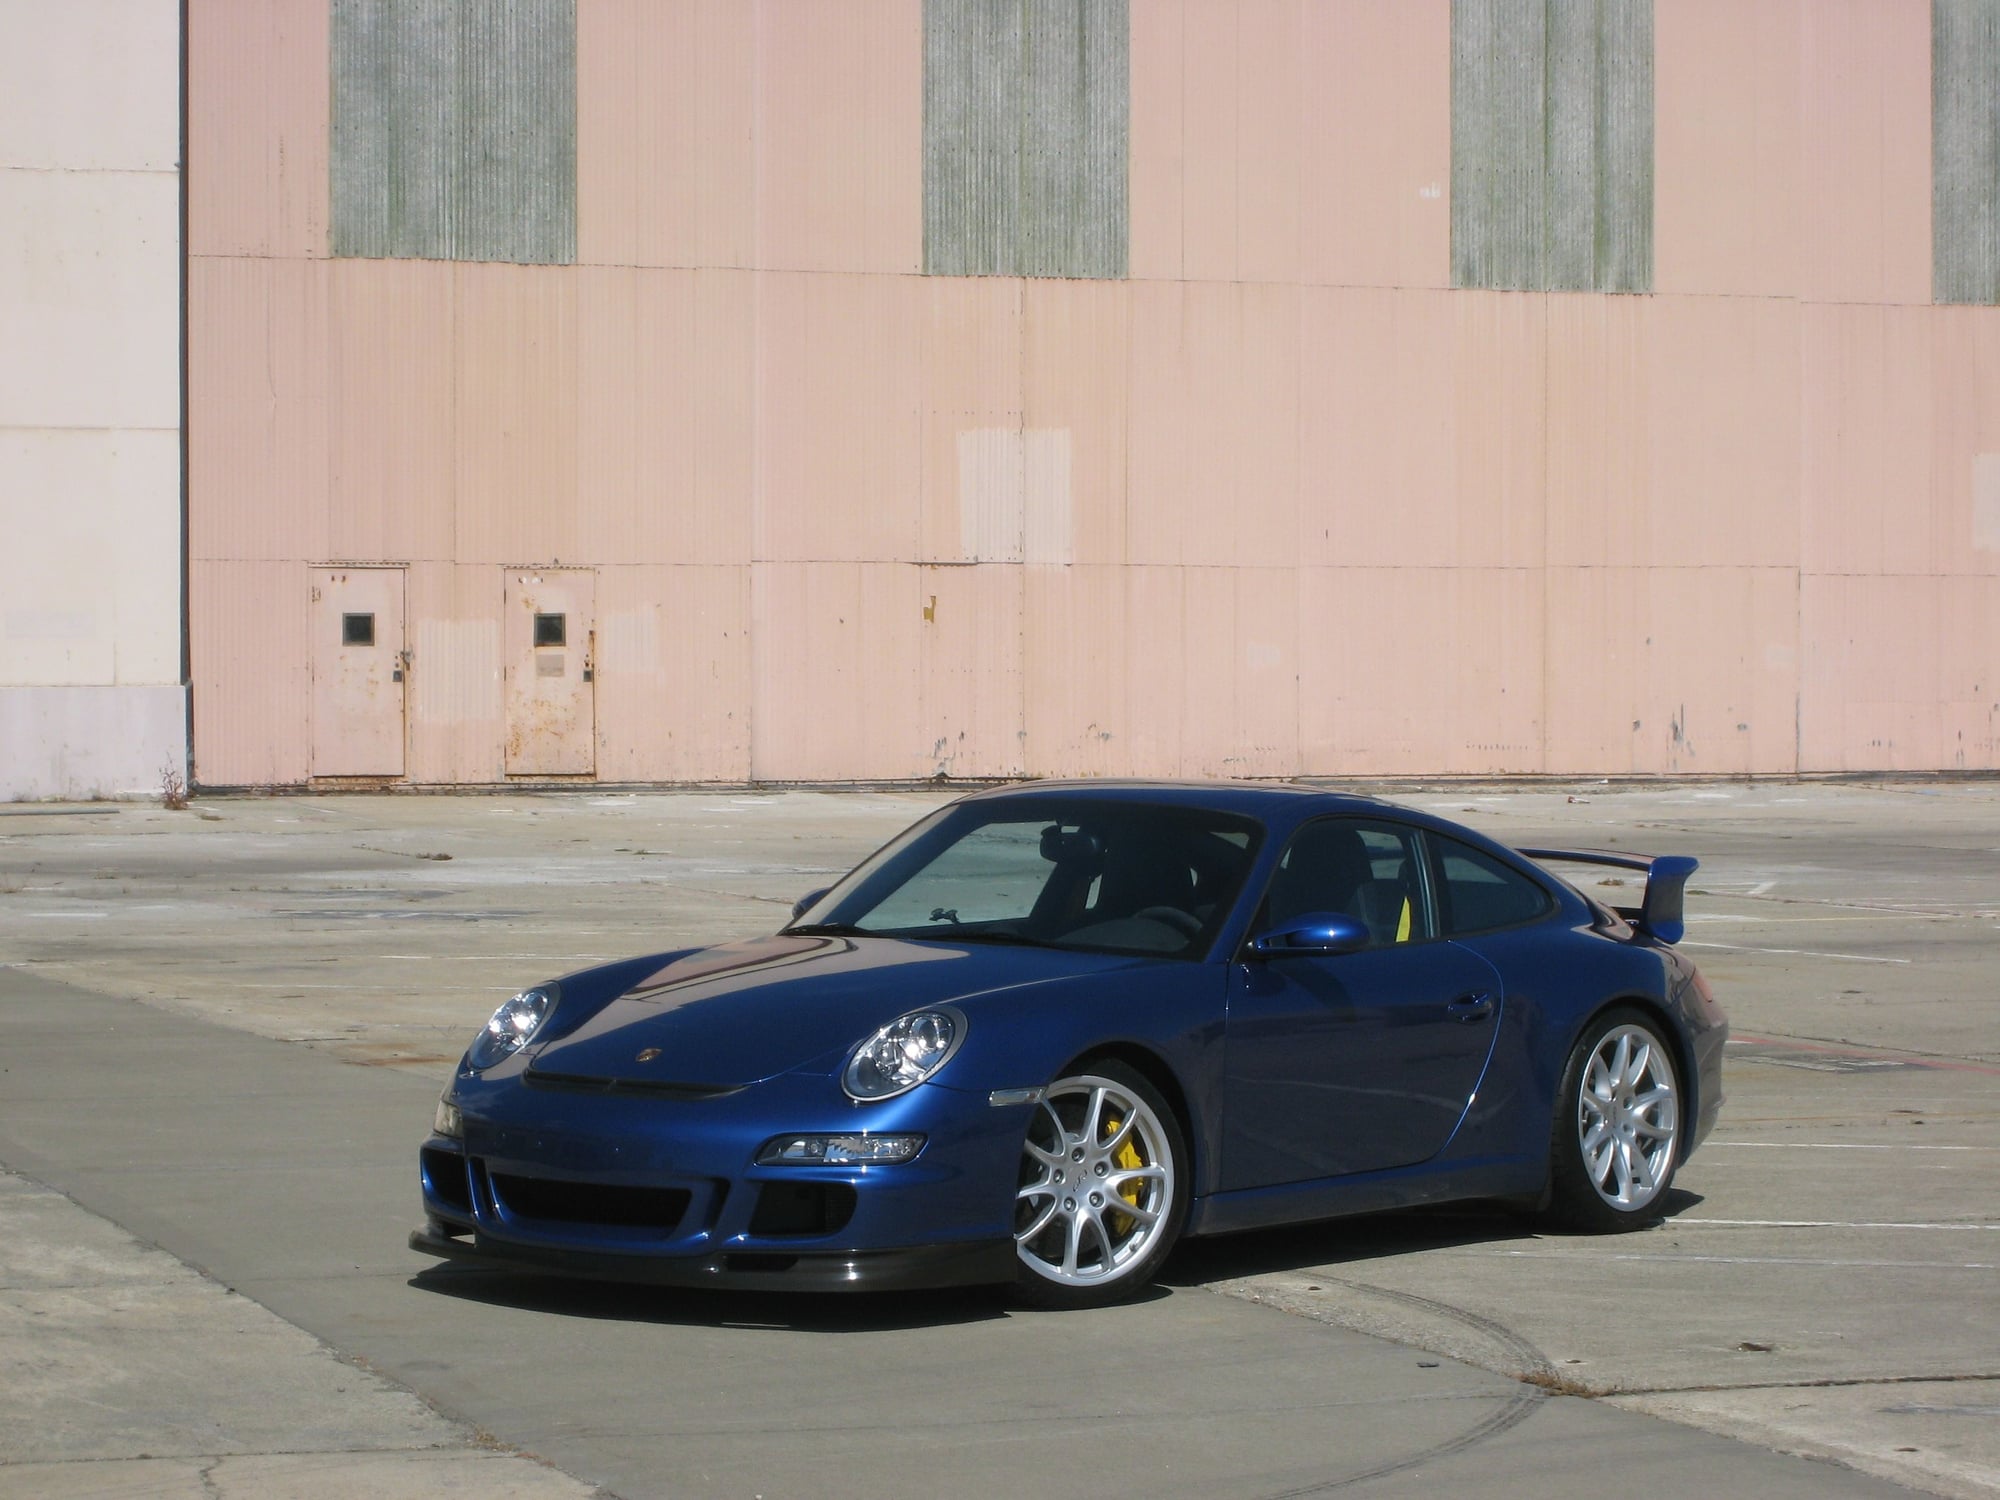 2007 Porsche GT3 - FS: 2007 GT3 (997.1) Beautiful & Rare Cobalt Blue 12,xxx miles - Used - VIN WP0AC29997S793001 - 12,700 Miles - 6 cyl - 2WD - Manual - Coupe - Blue - Sf Bay Area, CA 94002, United States